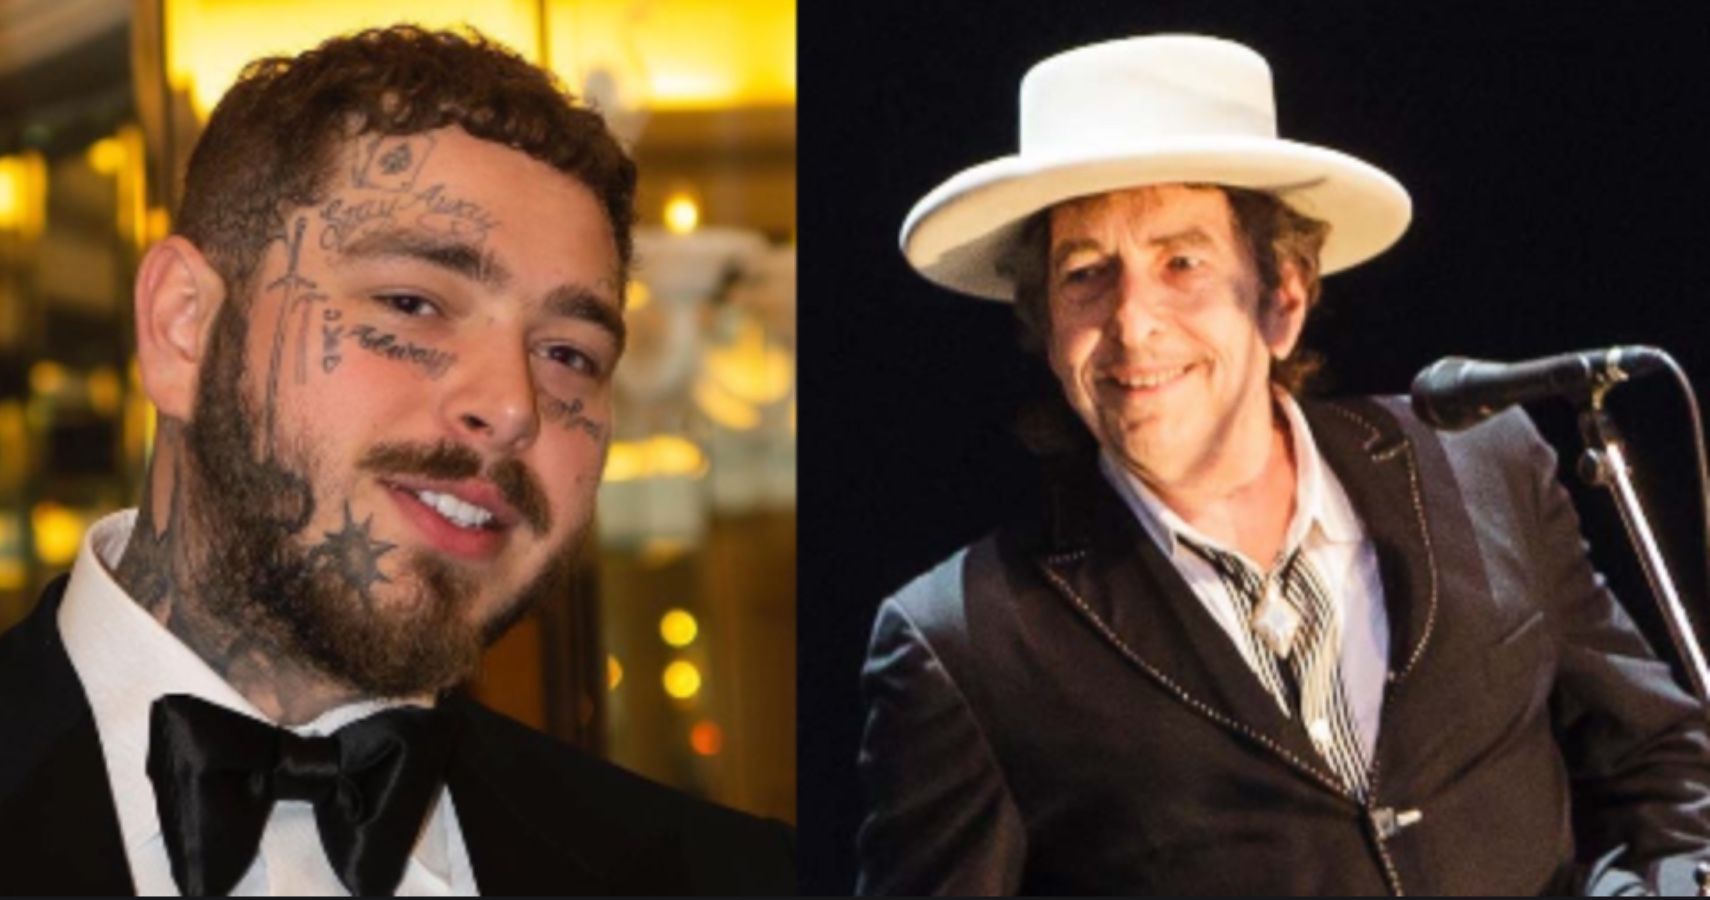 Bob Dylan Slid Into Post Malone’s DMs With A Purpose